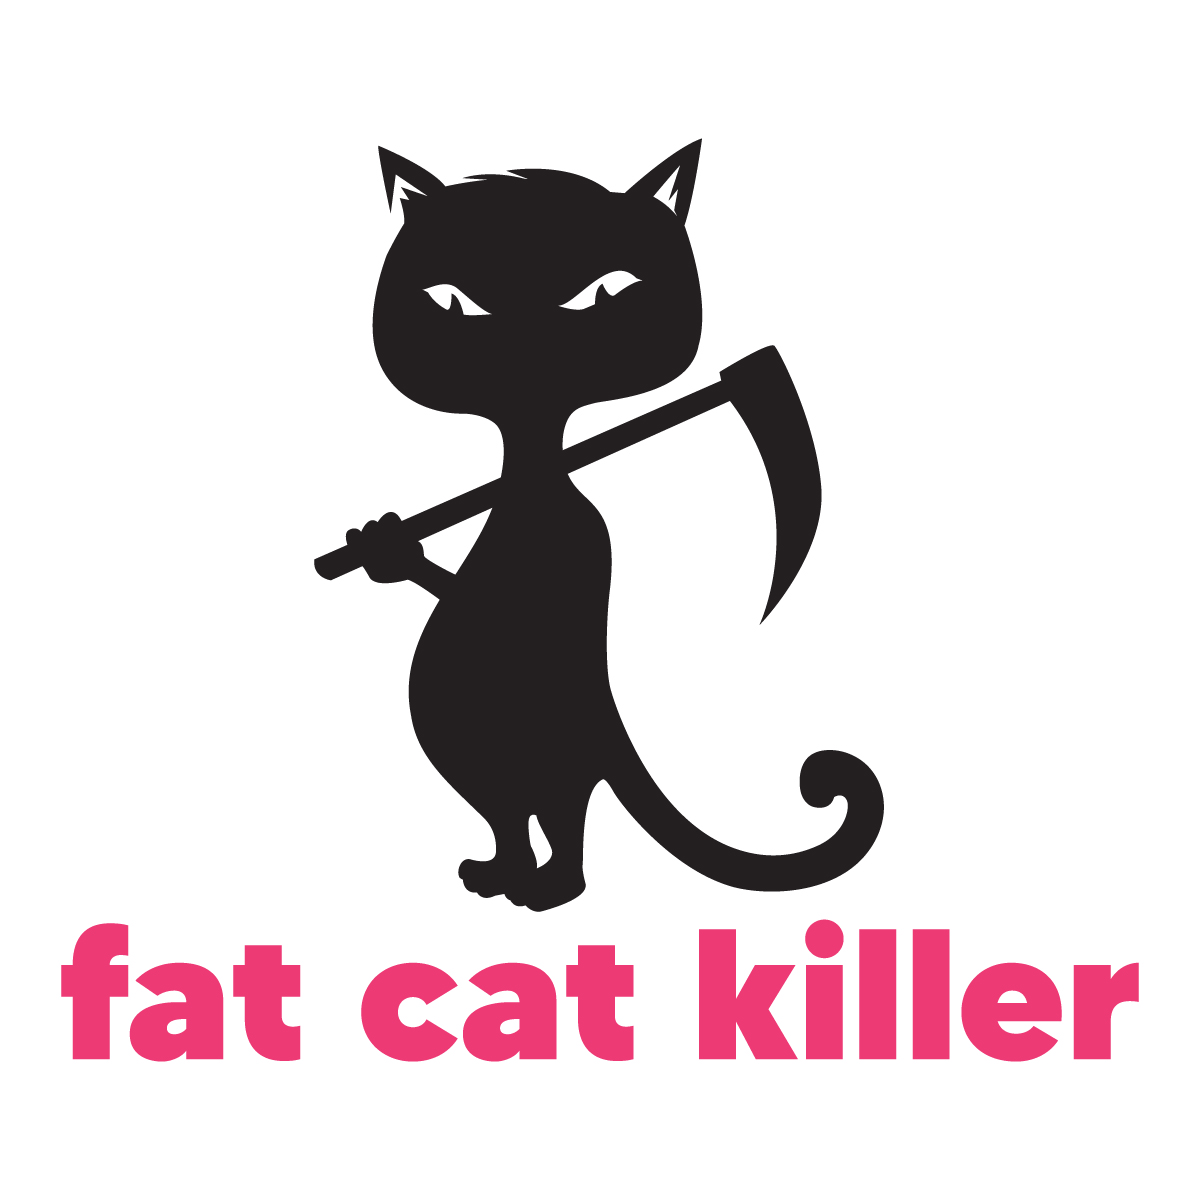 Disruptive Crypto Project Fat Cat Killer Set To Launch in April under the ticker: $FCKCOIN